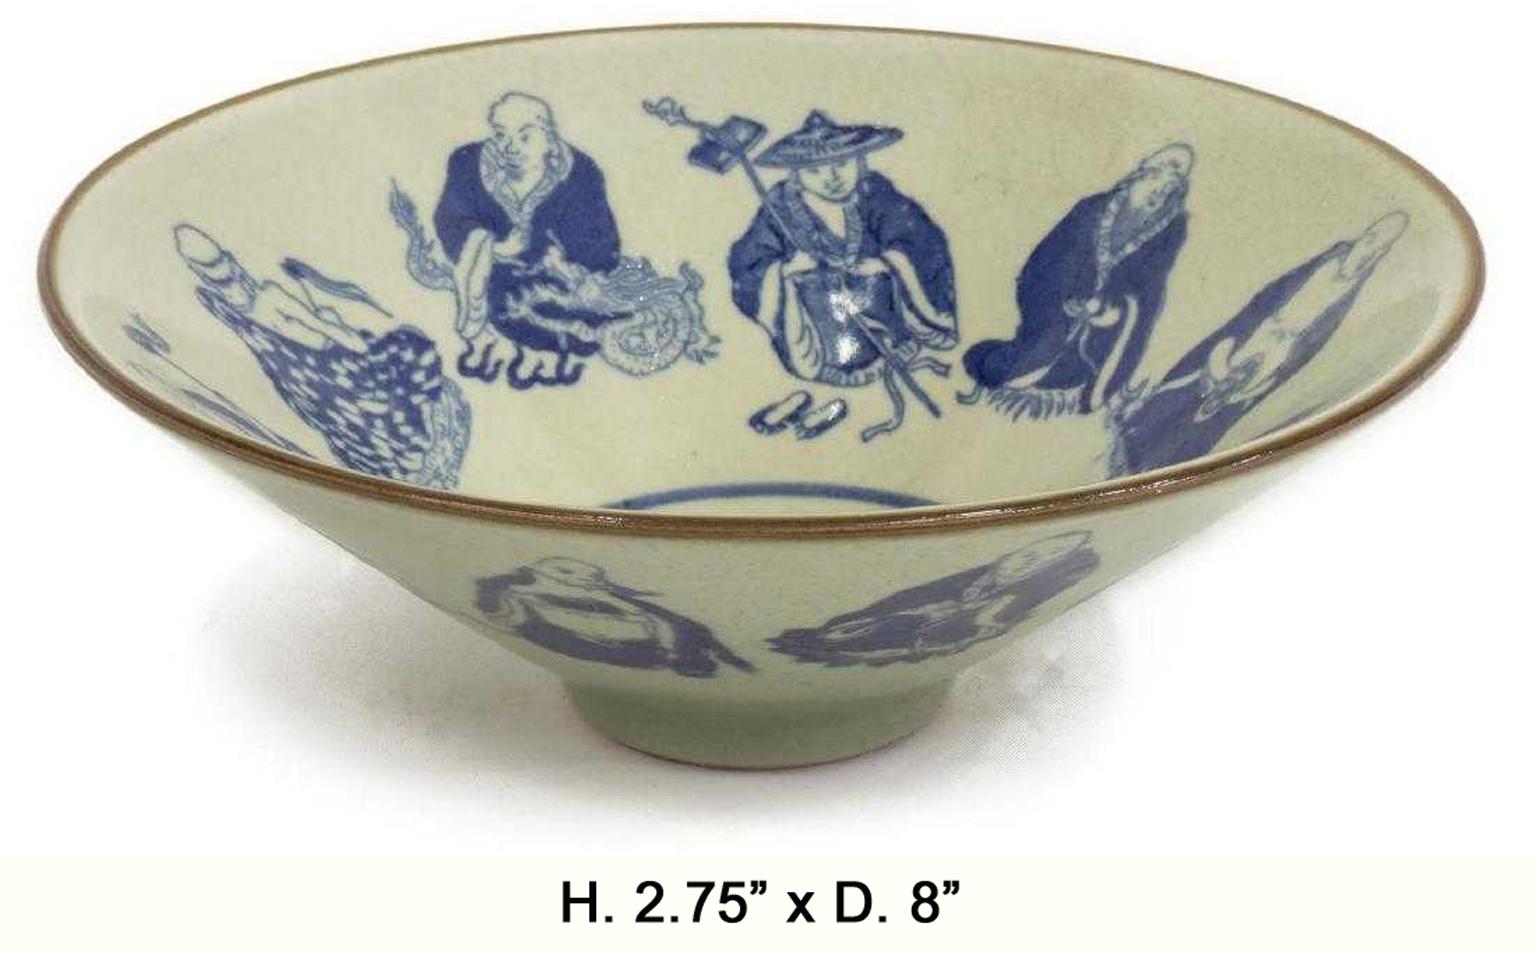 Unique Chinese porcelain conical form bowl with celadon ground, depicting nine blue glazed immortal figures on both the interior and exterior of the bowl, centered by Buddha character, raised on a short foot with a Ming Wanli six character